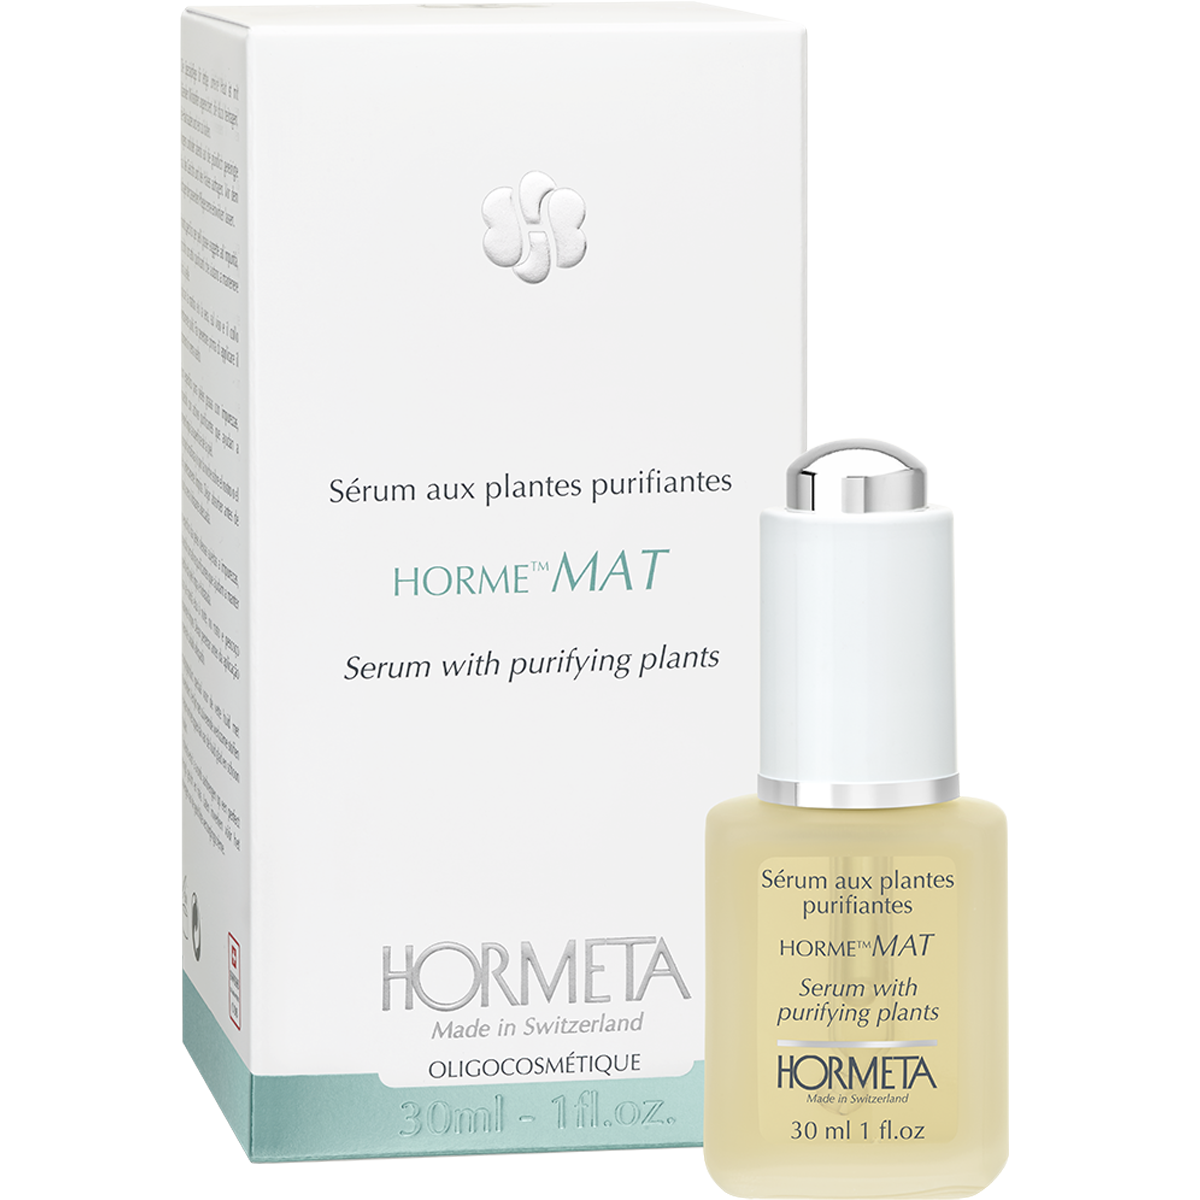 Serum for fet hud - HORME MAT Serum with purifying plants